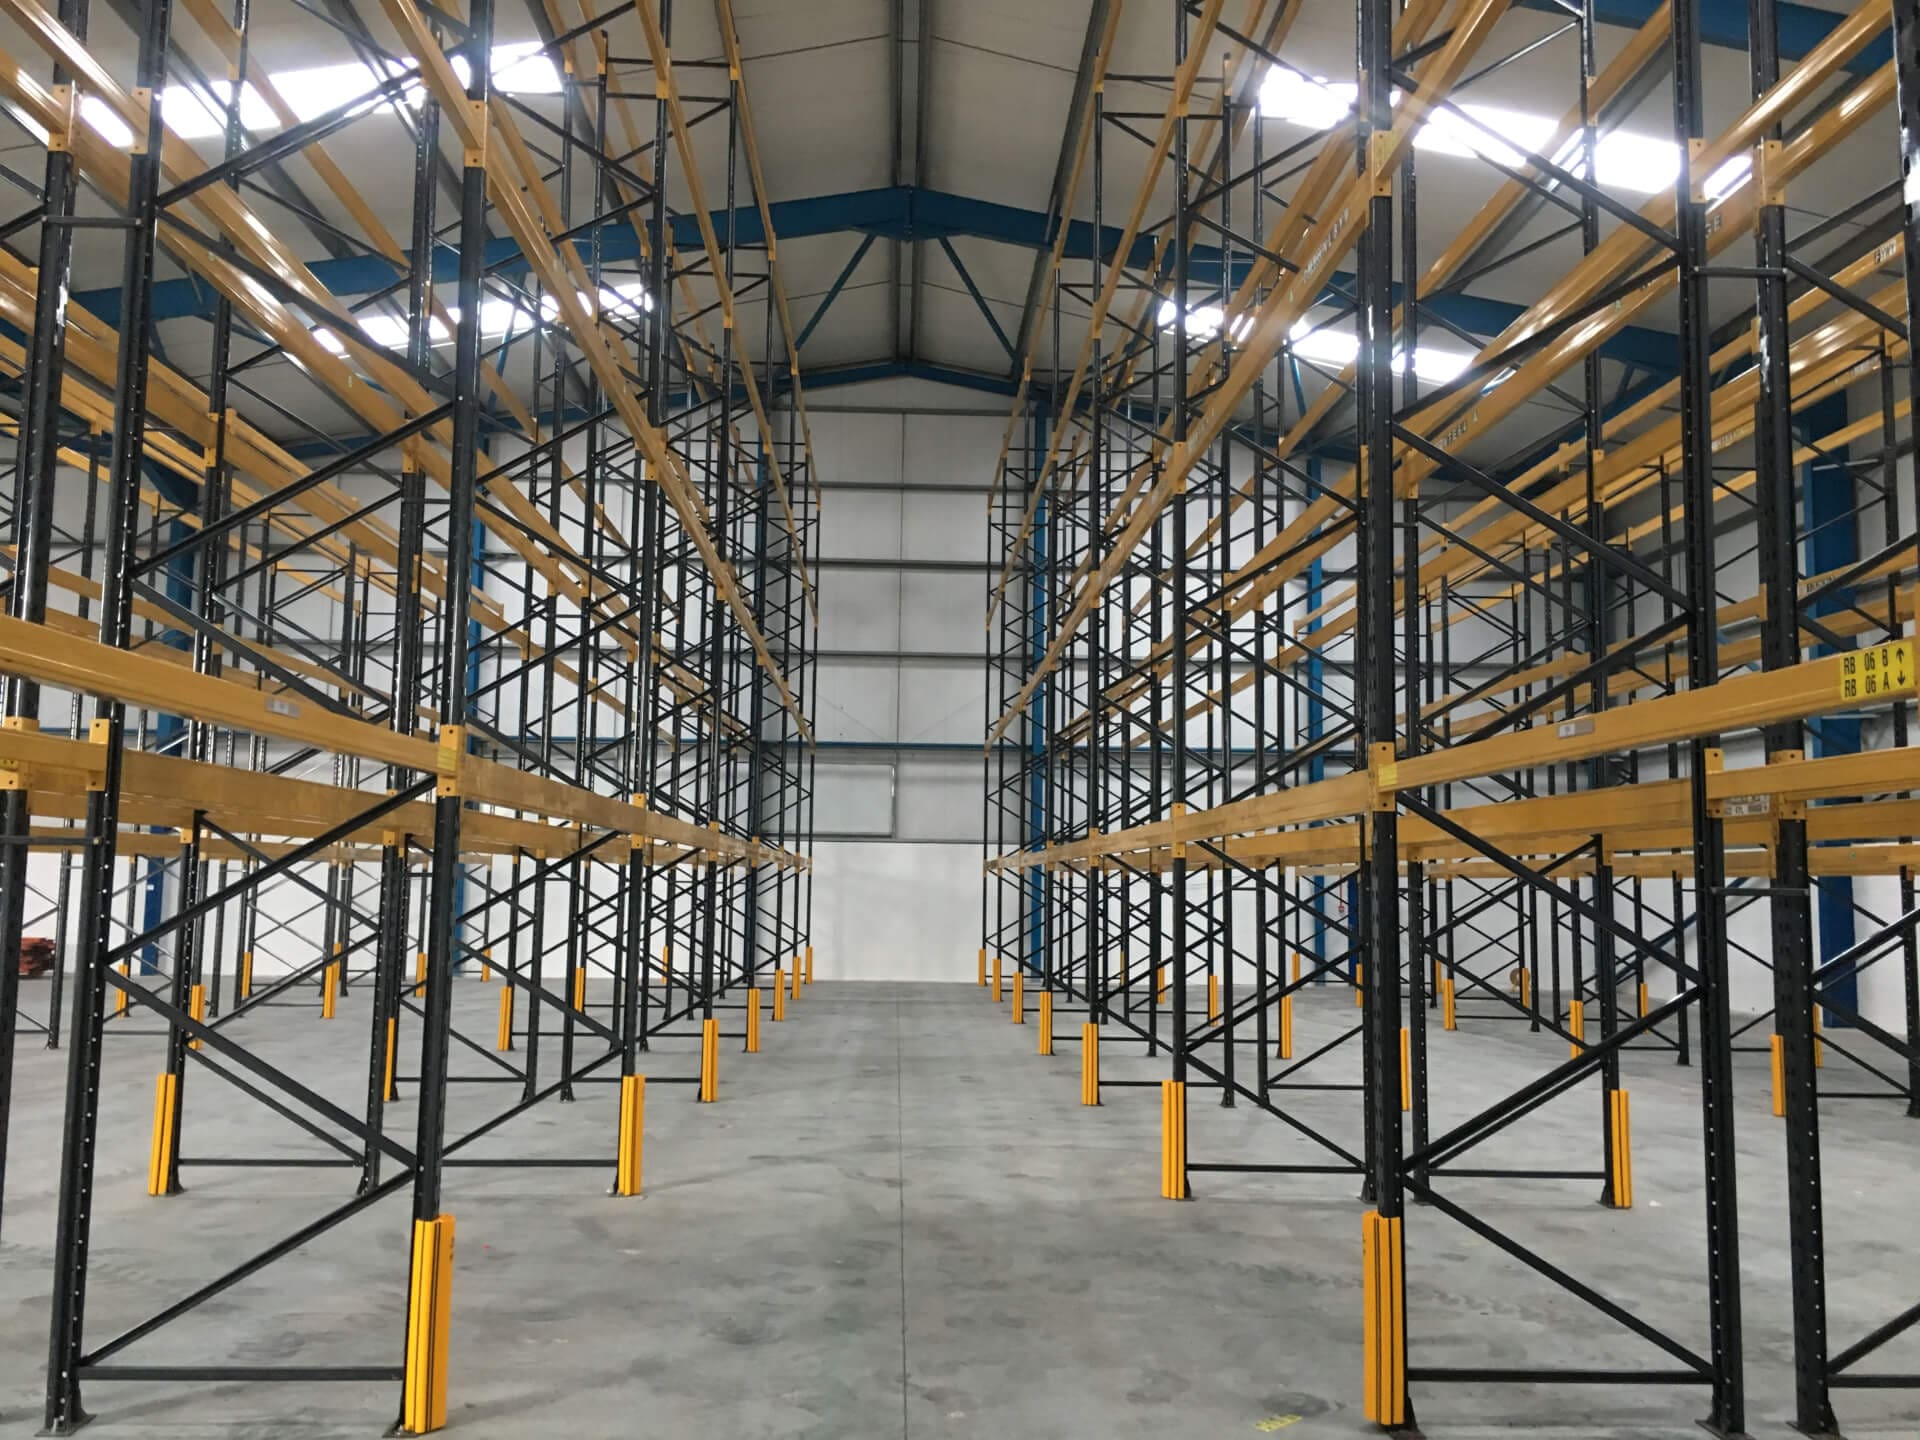 Racking for Sale, Warehouse Racking Systems in London, Pallet Racking, Second Hand Link 51 Pallet Racking UK, Second Hand Link 51 Pallet Racking North, Second Hand Link 51 Pallet Racking North West, Second Hand Link 51 Pallet Racking North East, Second Hand Link 51 Pallet Racking County Durham, Link 51 Pallet Racking, Warehousing